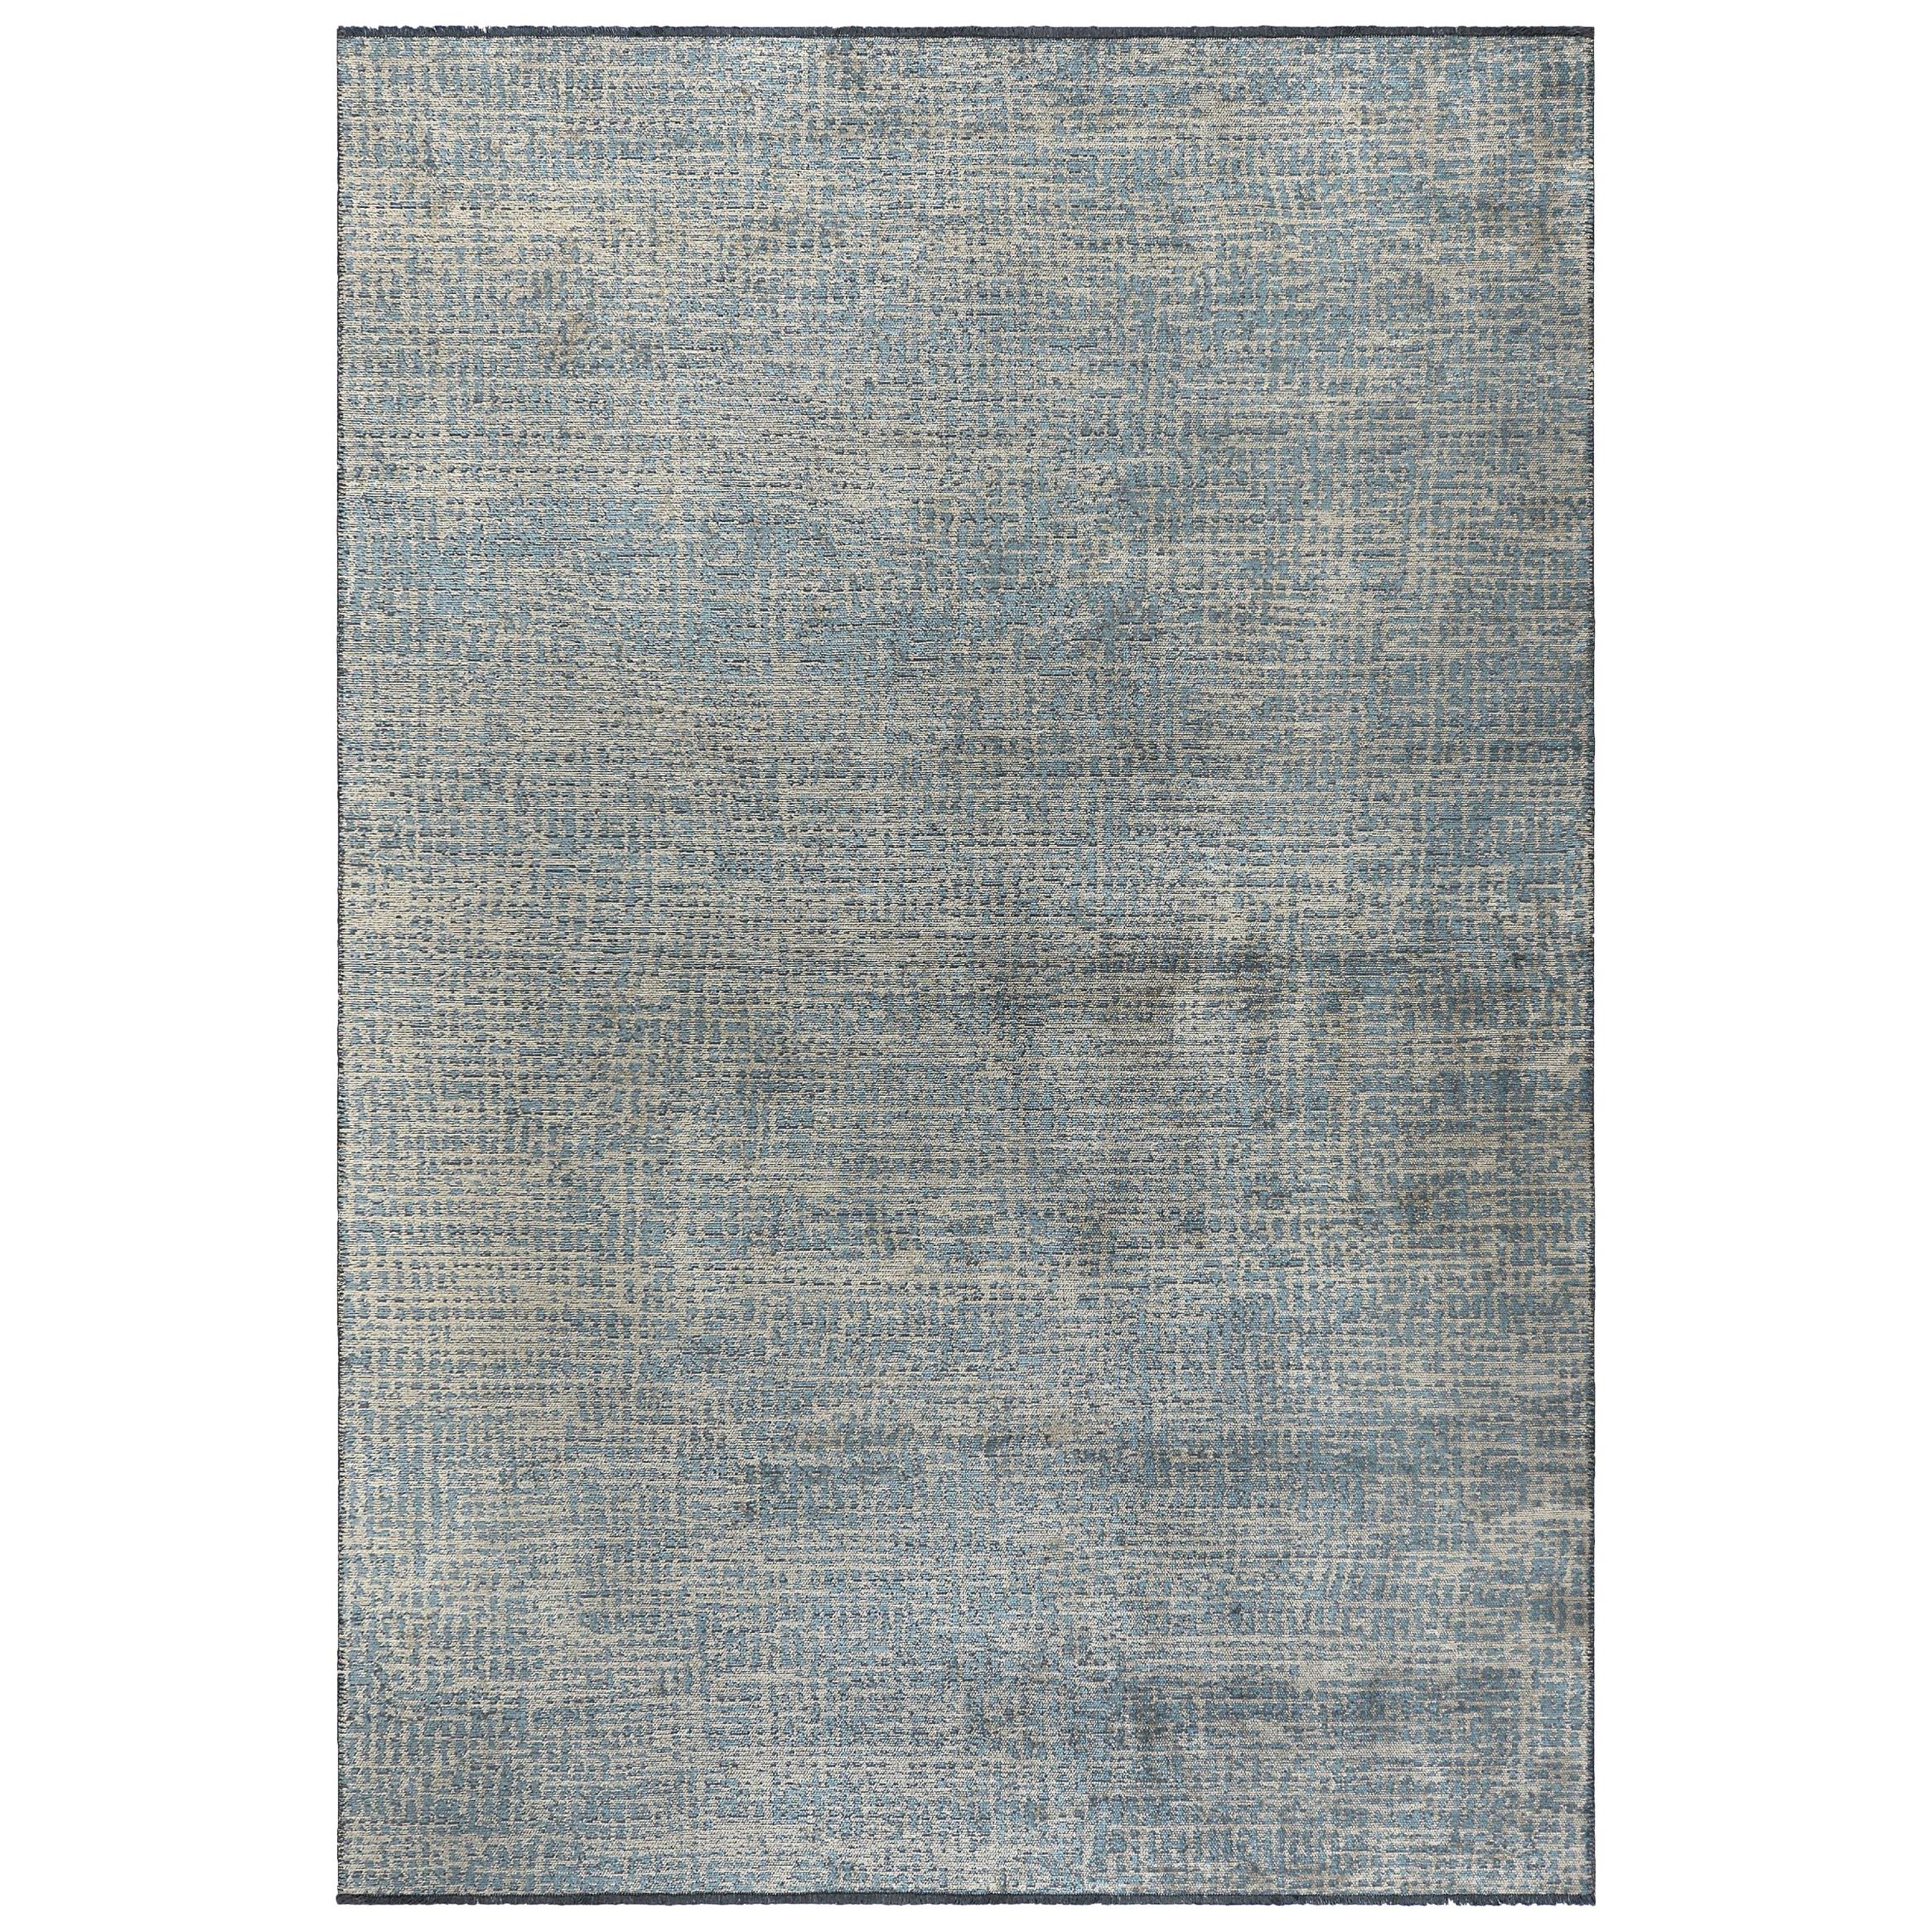 Light Blue and Silver Gray Tight Grid Abstract-Geo Pattern Rug with Patina